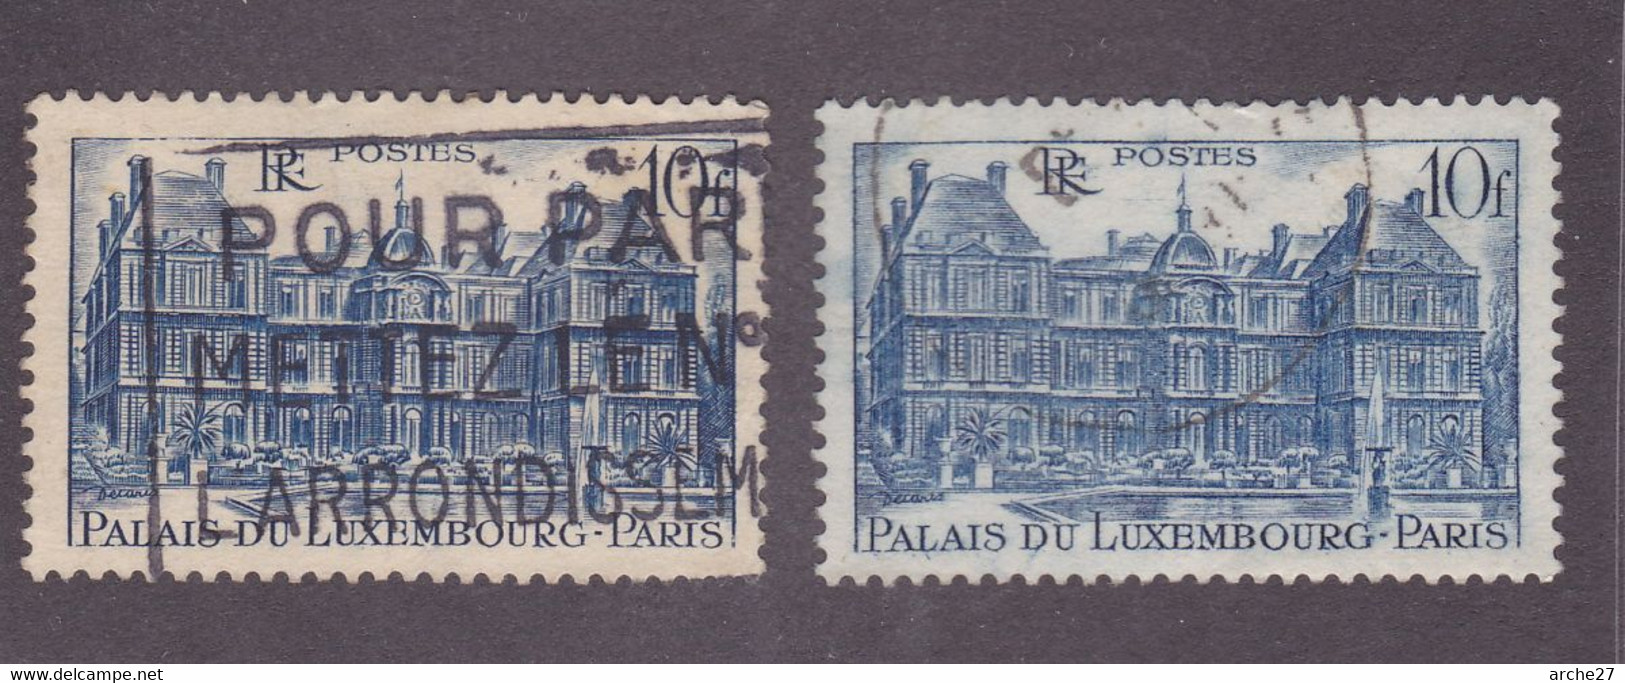 TIMBRE FRANCE N° 760 OBLITERE - Used Stamps